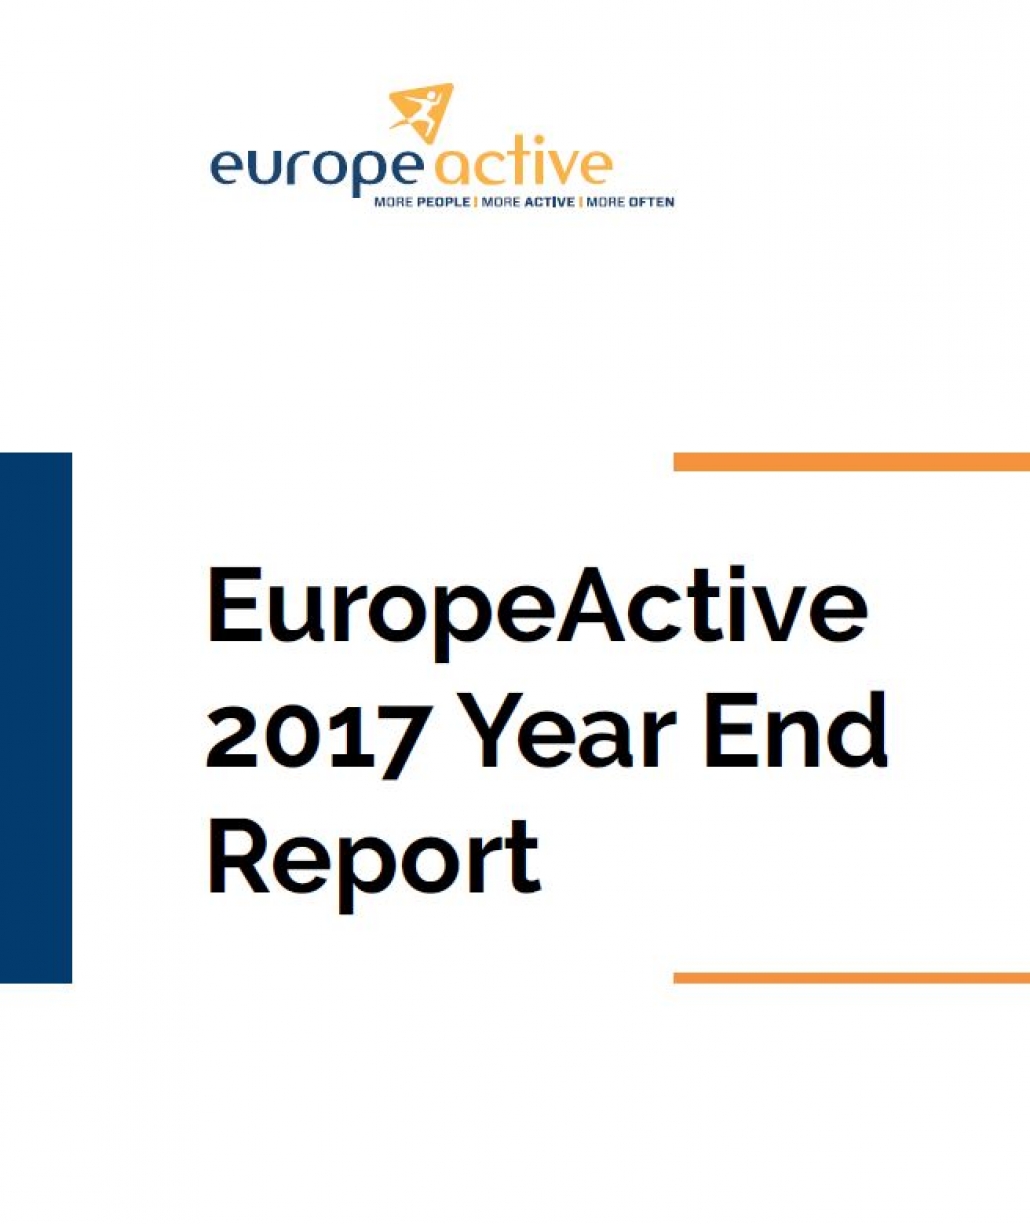 EuropeActive Year End Report 2017